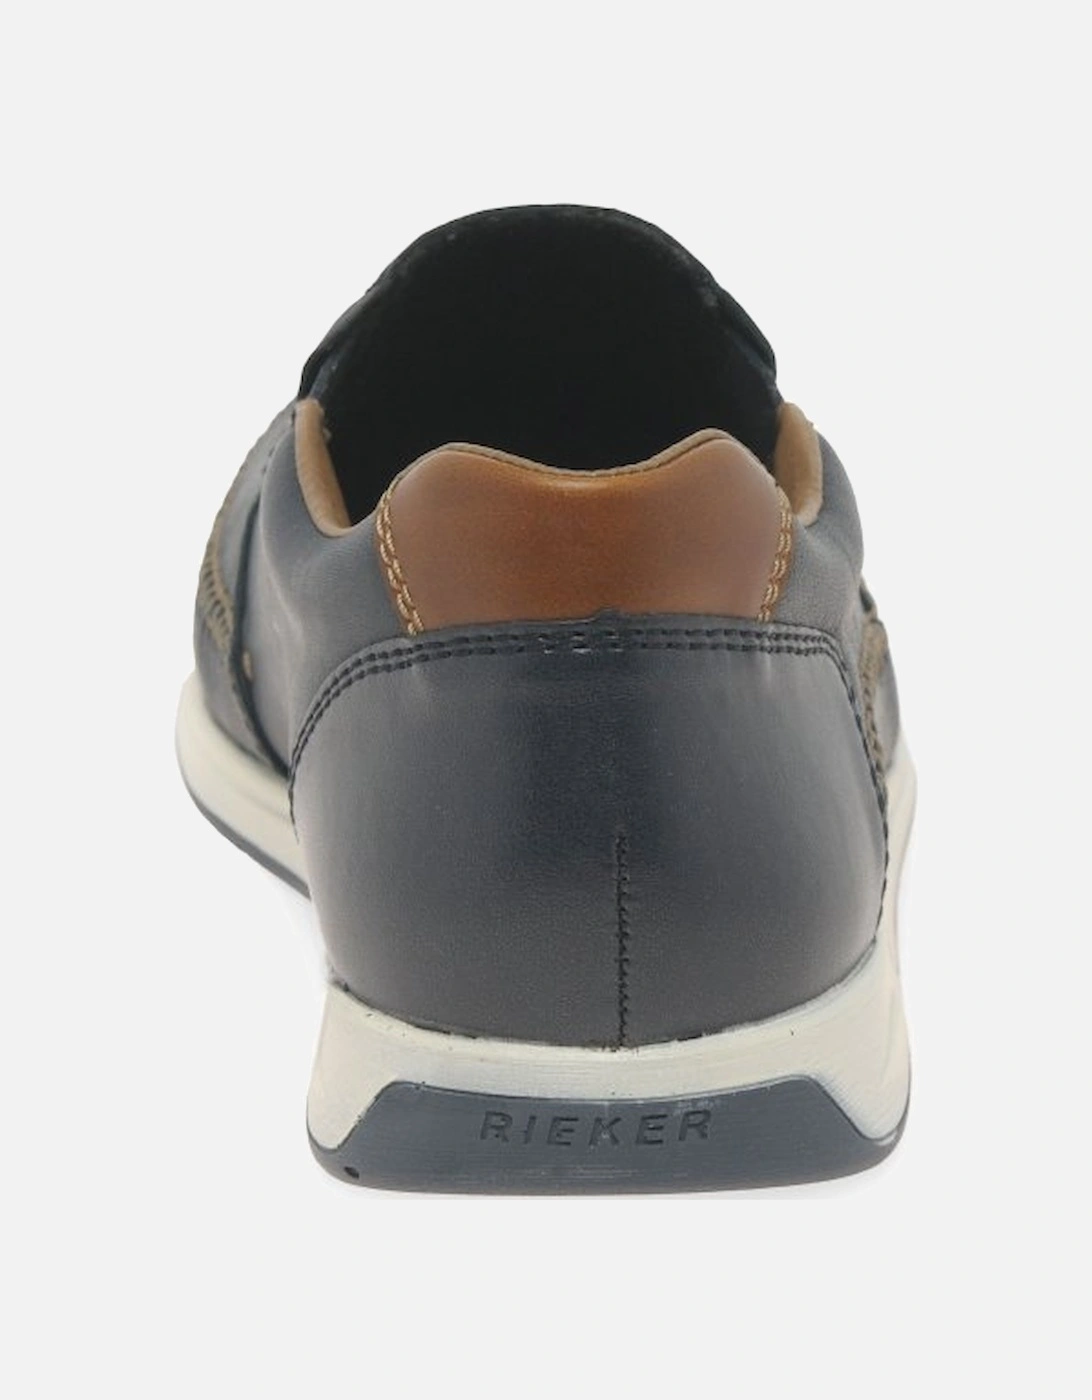 Tempo Mens Slip On Shoes